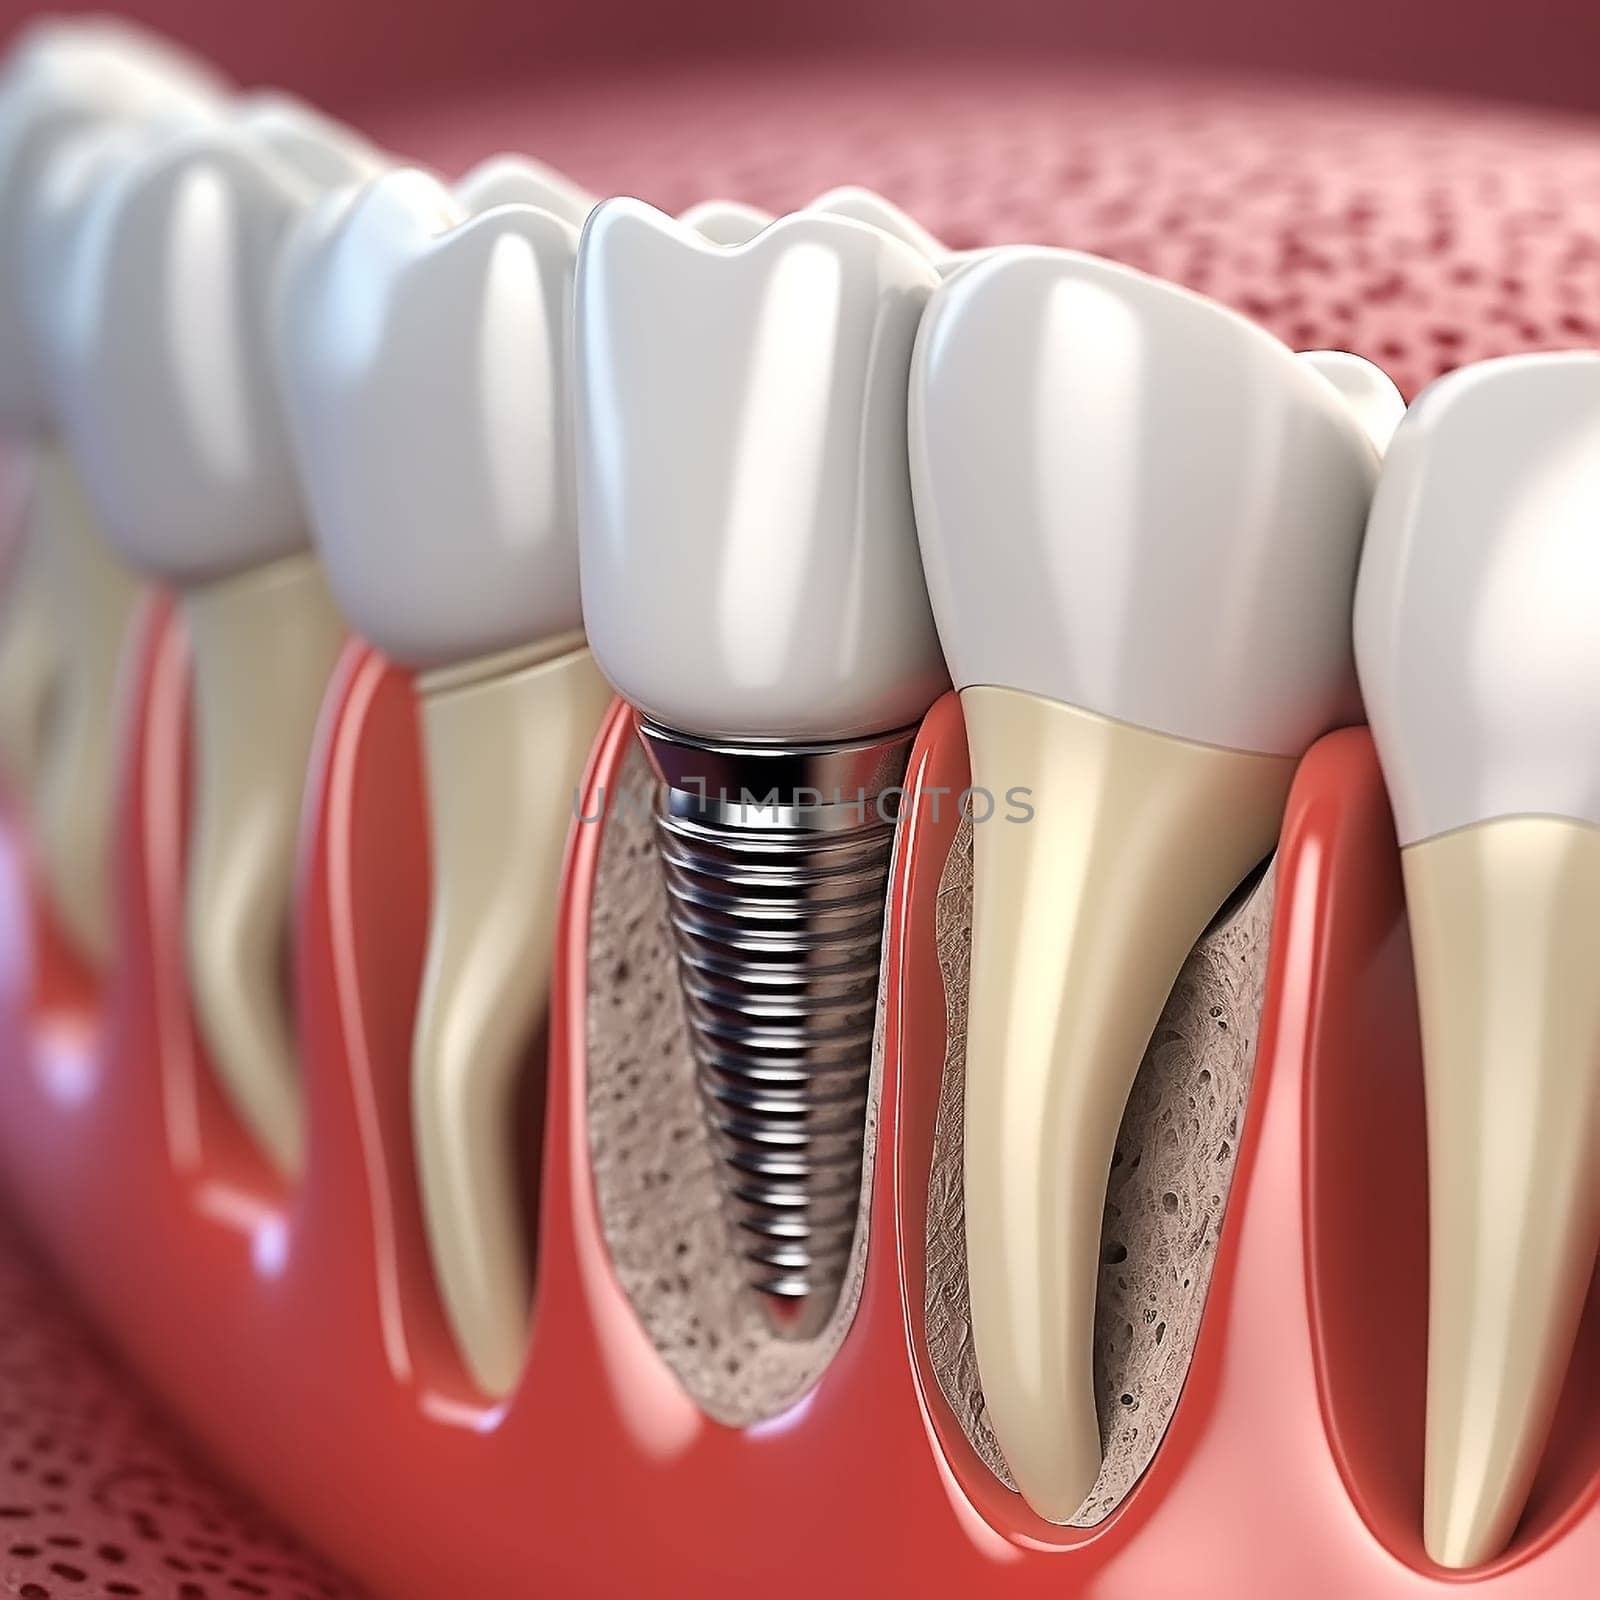 Periimplantitis with visible bone damage. Medically accurate 3D illustration of dental implants concept by sarymsakov